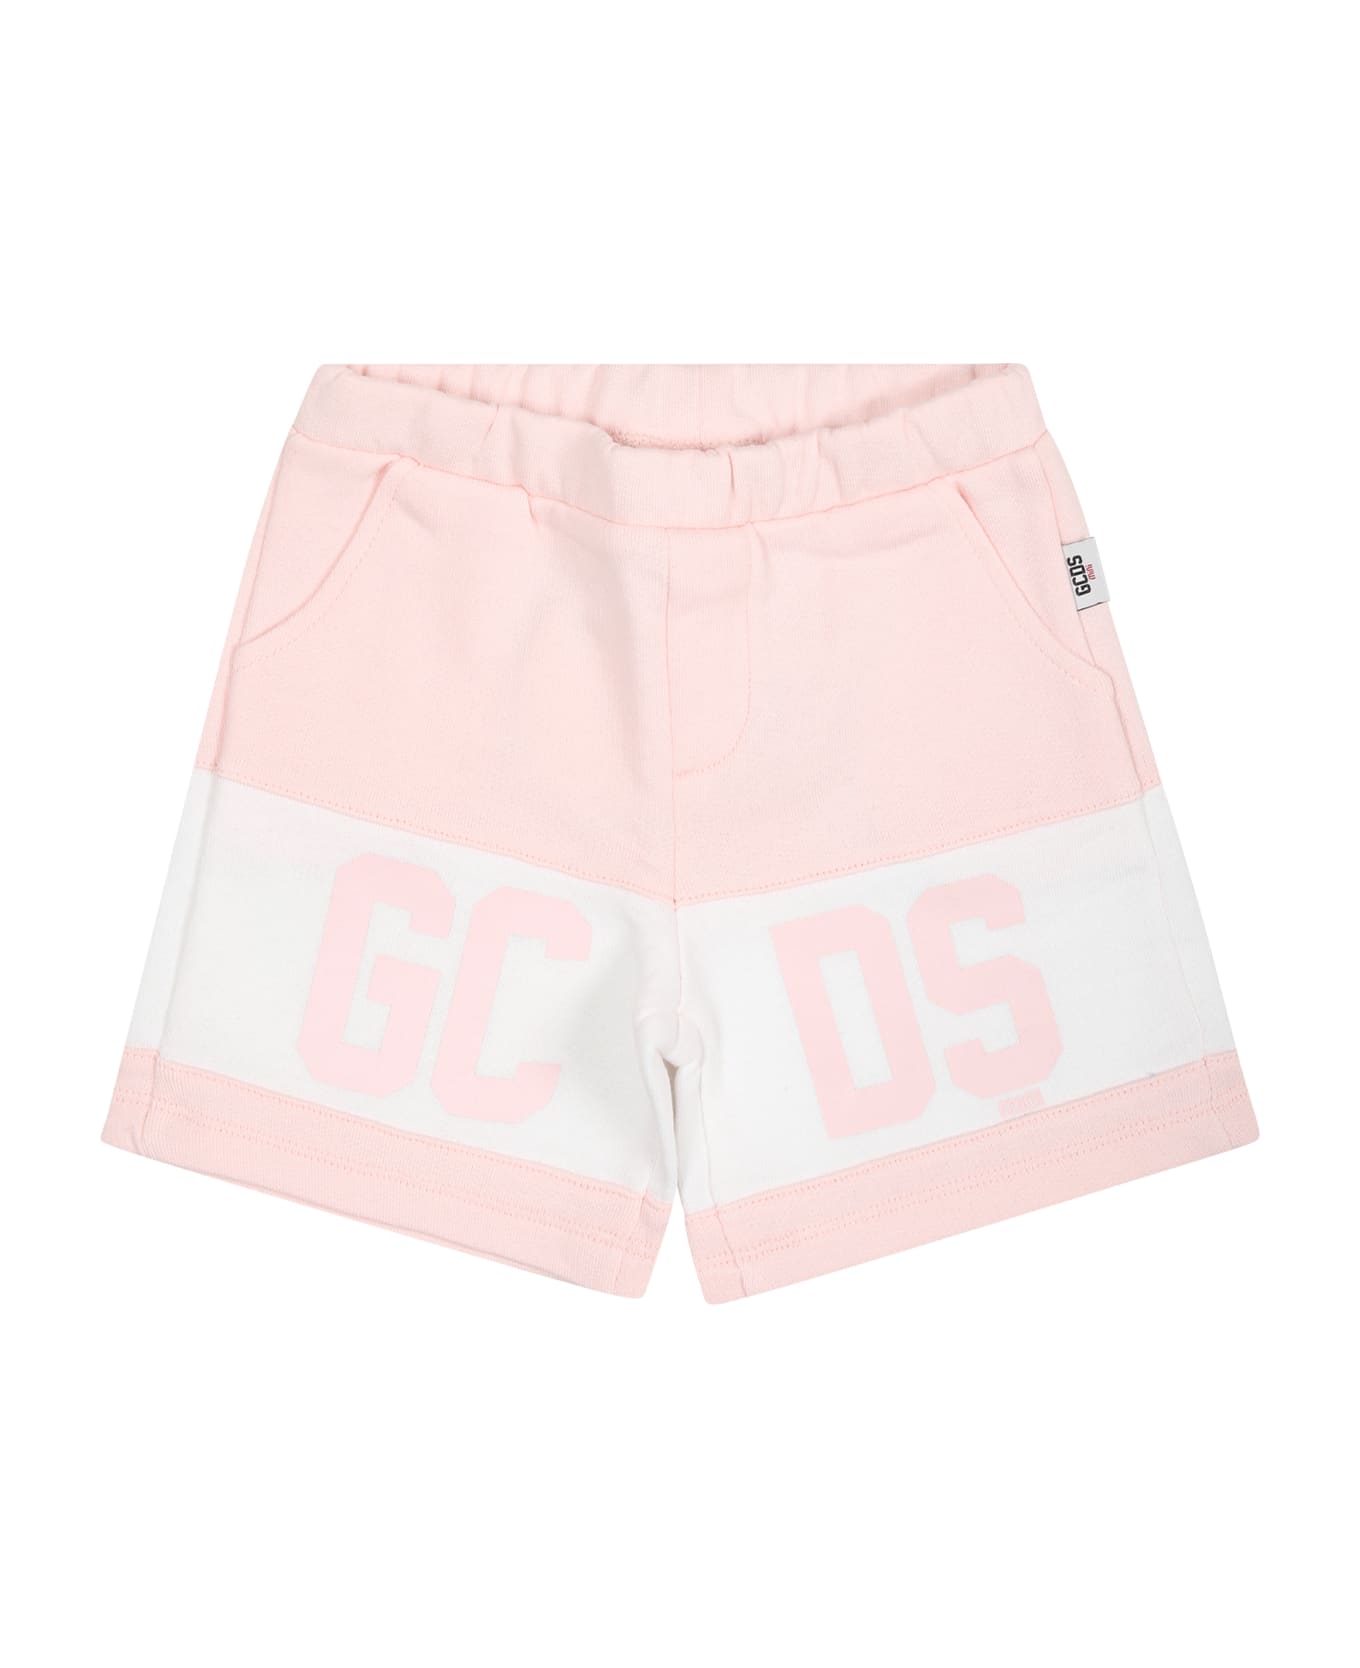 GCDS Mini Pink Sports Shorts For Babies With Logo - Pink ボトムス